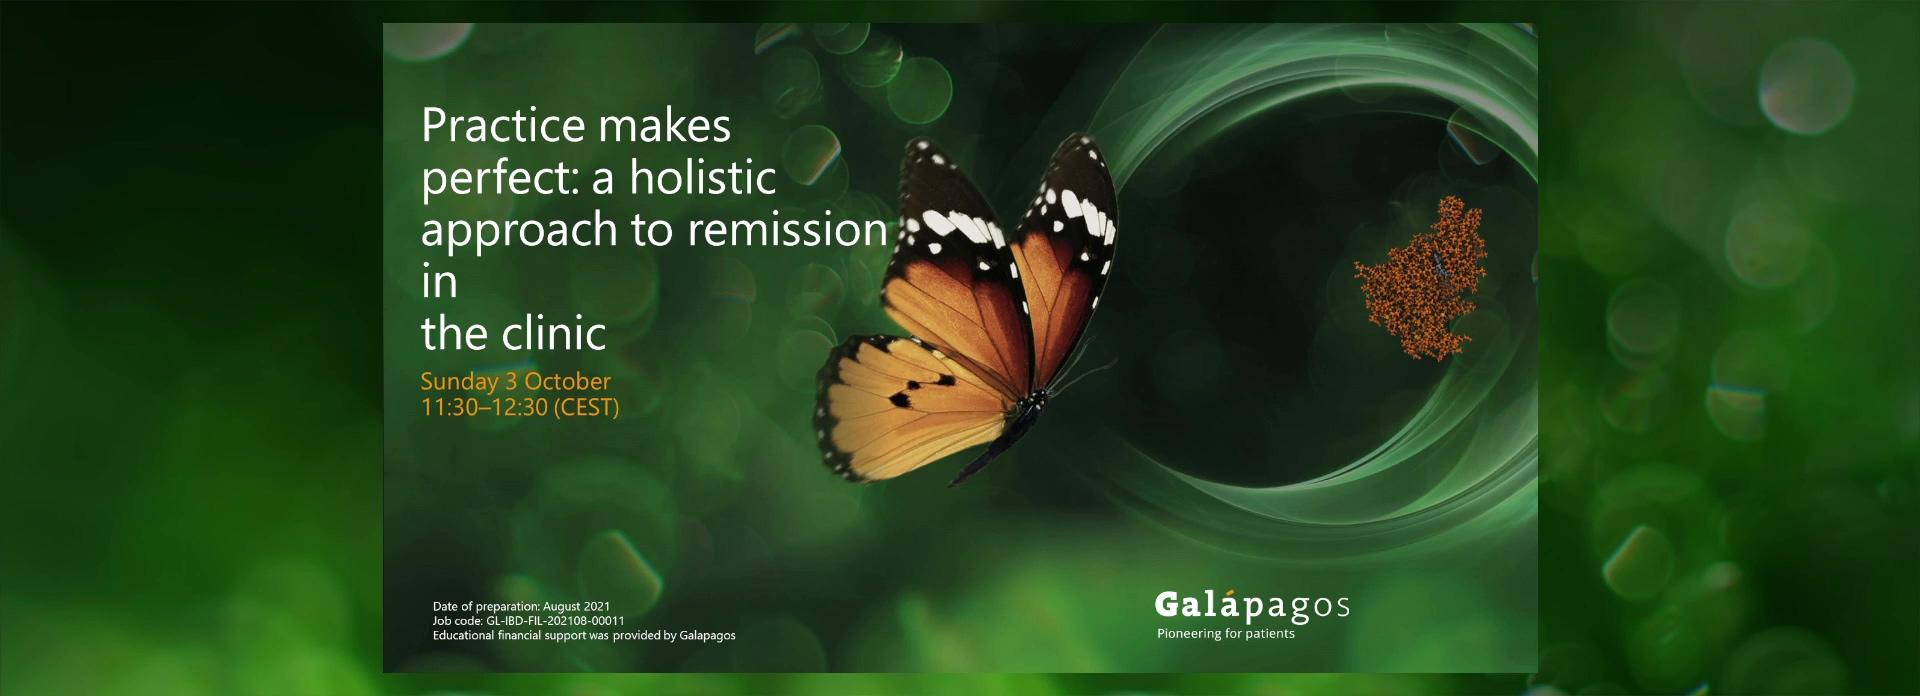 Practice makes perfect: a holistic approach to remission in the clinic (Galapagos)